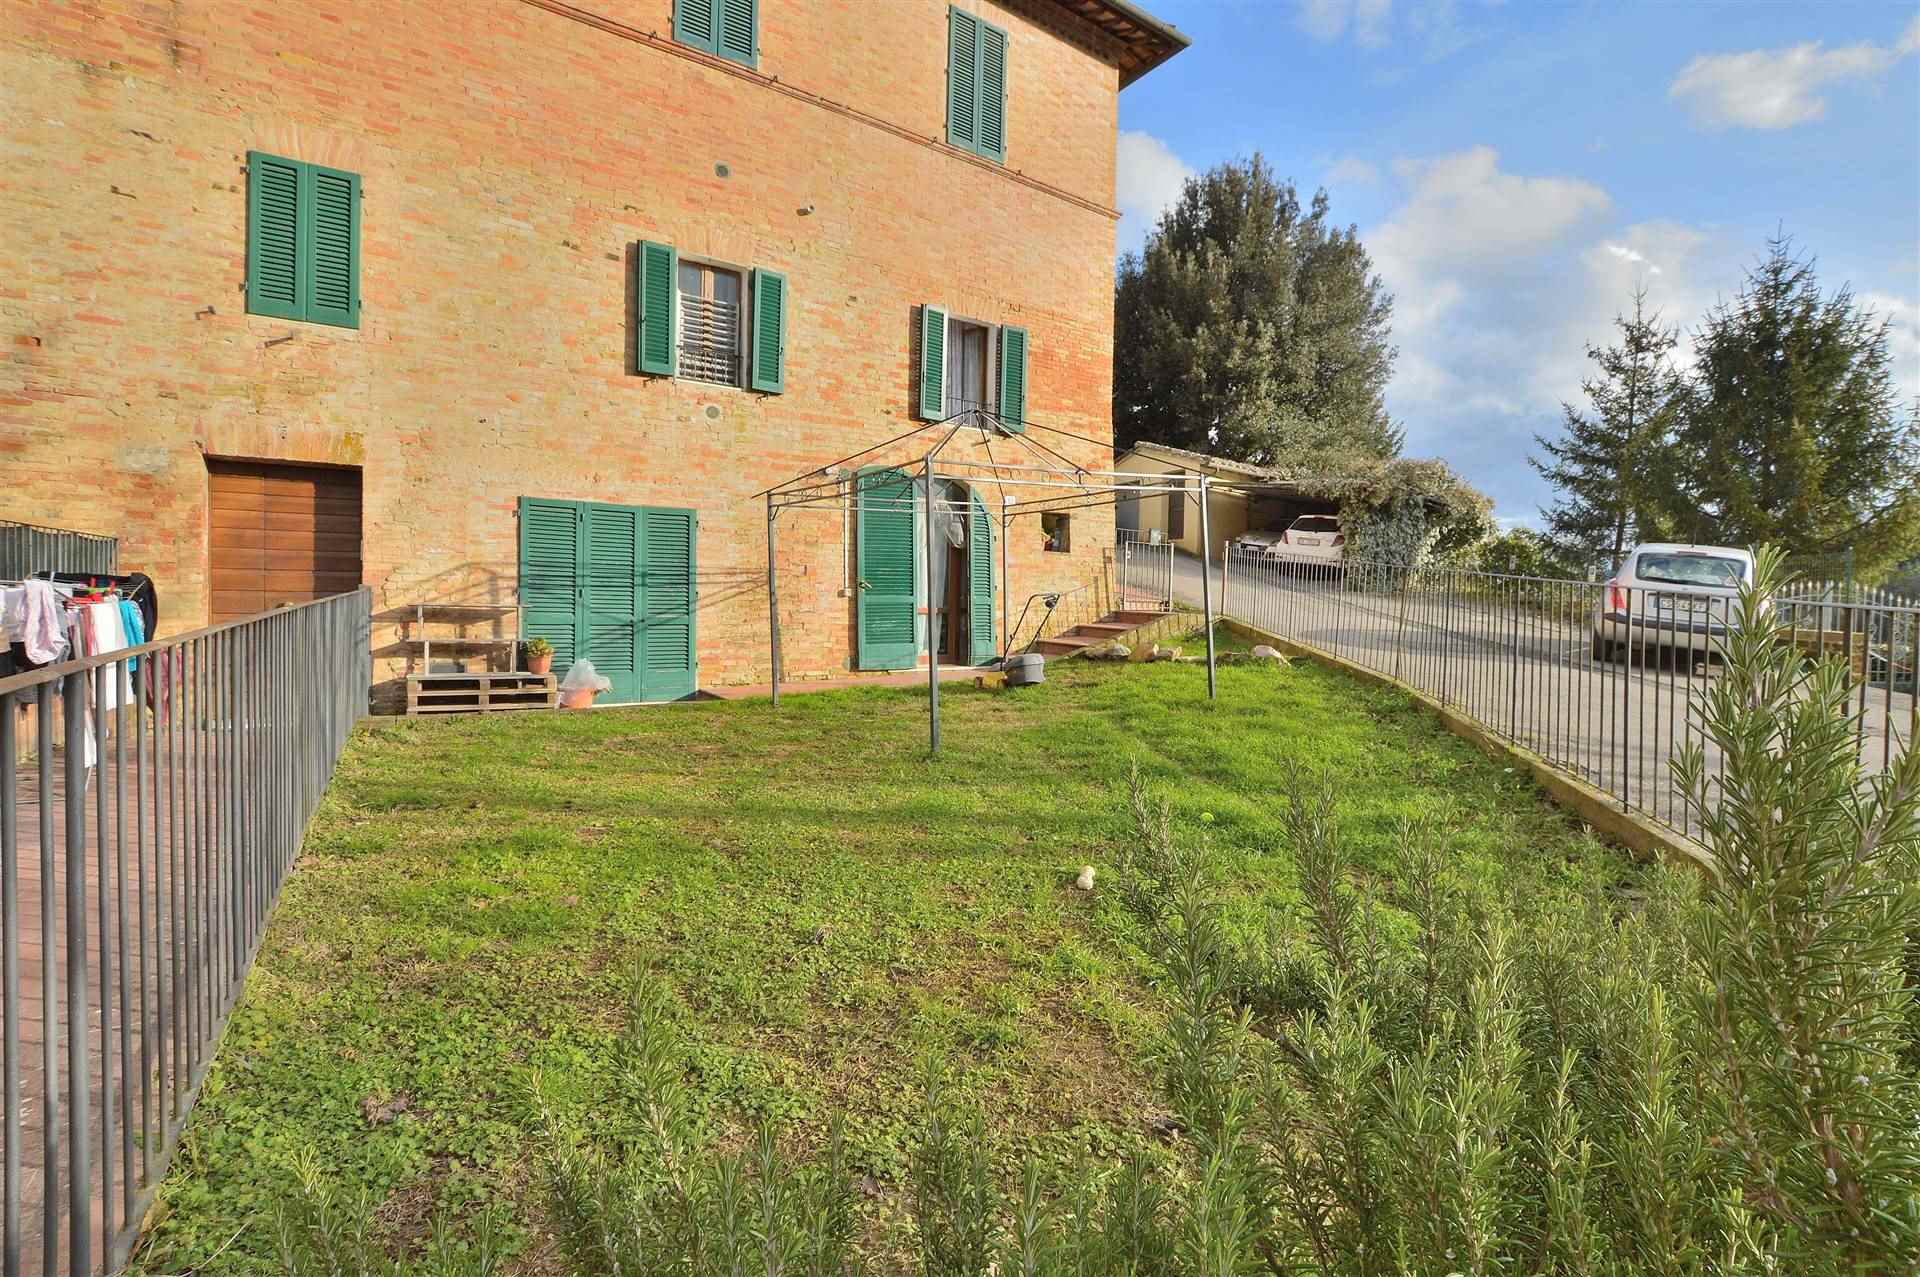 PIAN DELLE FORNACI, SIENA, Apartment for sale of 157 Sq. mt., Good condition, Heating Individual heating system, Energetic class: G, Epi: 175 kwh/m2 year, placed at Ground on 2, composed by: 6 Rooms, 